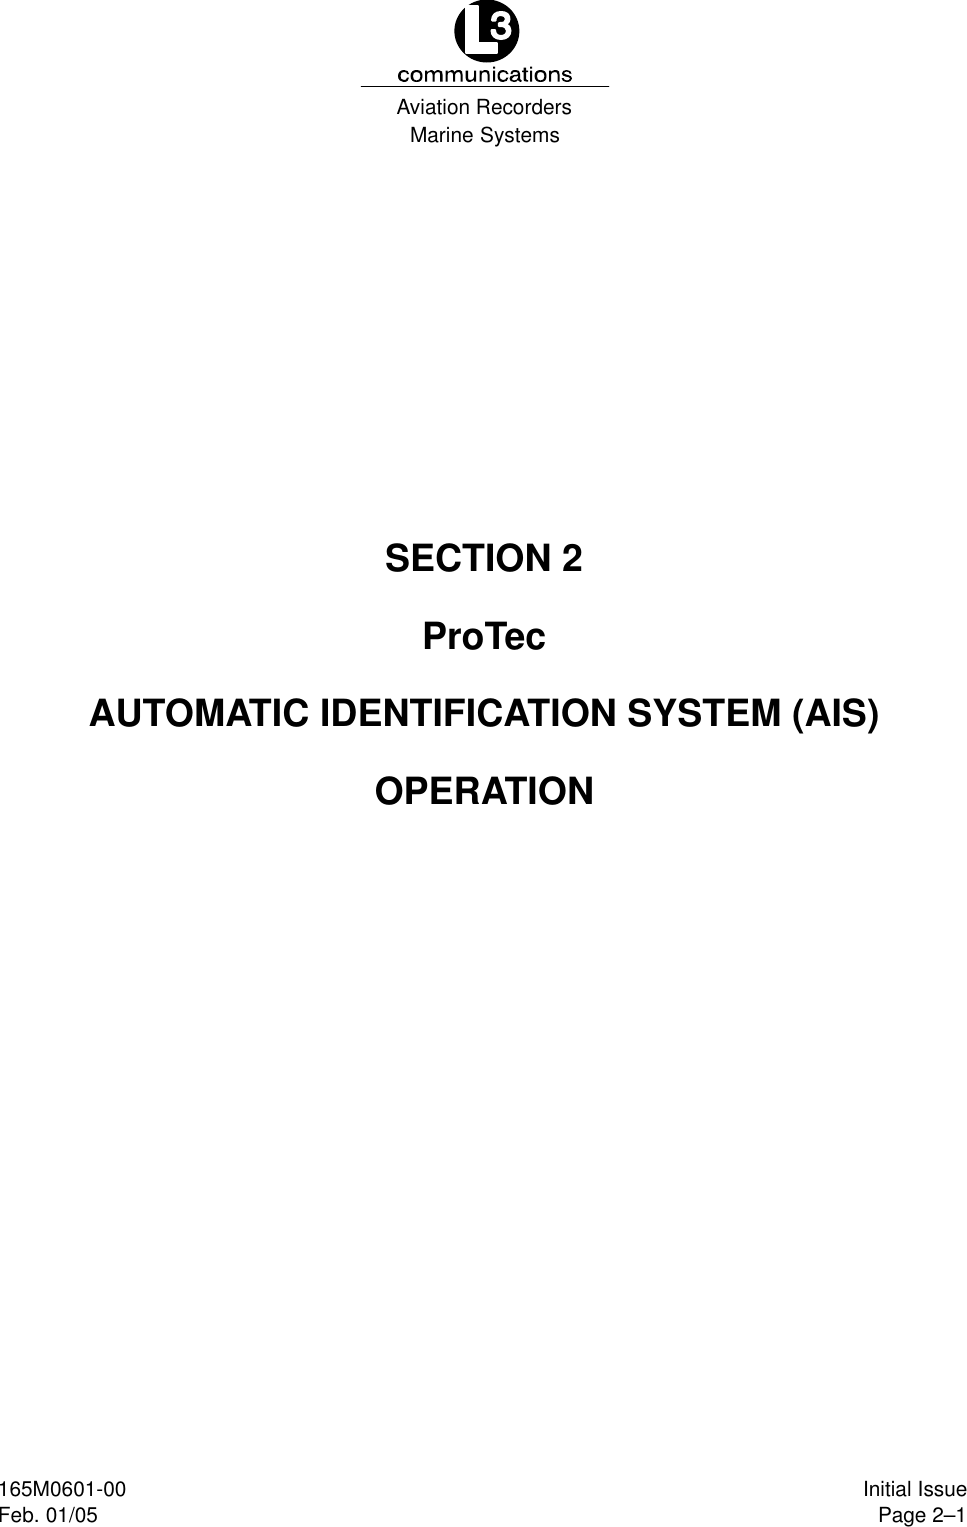 Marine SystemsAviation RecordersPage 2–1Initial Issue165M0601-00Feb. 01/05SECTION 2ProTecAUTOMATIC IDENTIFICATION SYSTEM (AIS)OPERATION